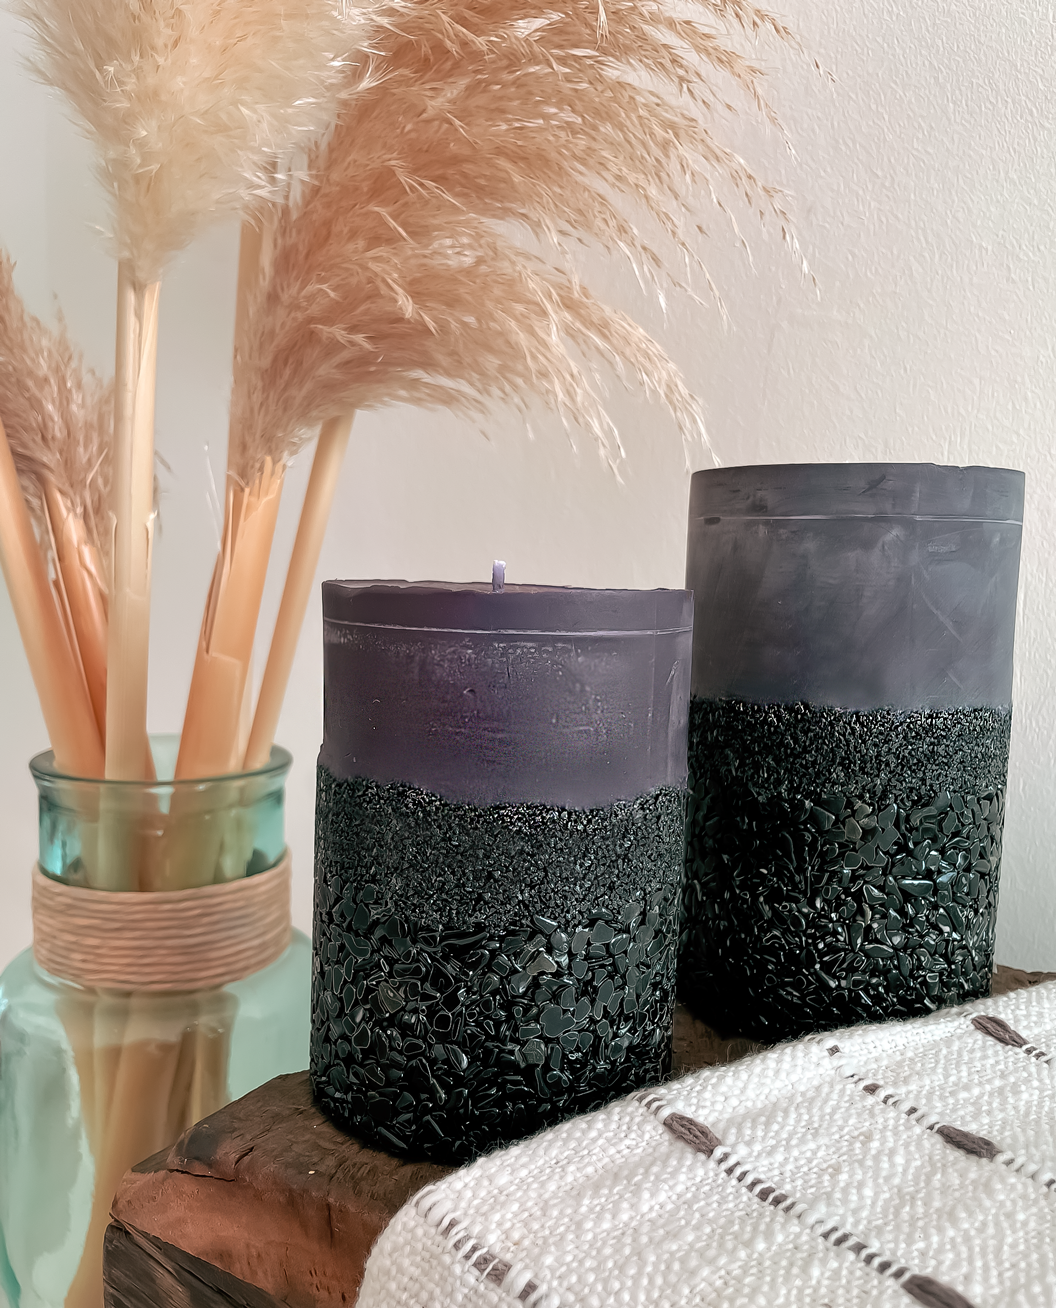 Two Black Onyx Crystal Candles Used to Decorate the House